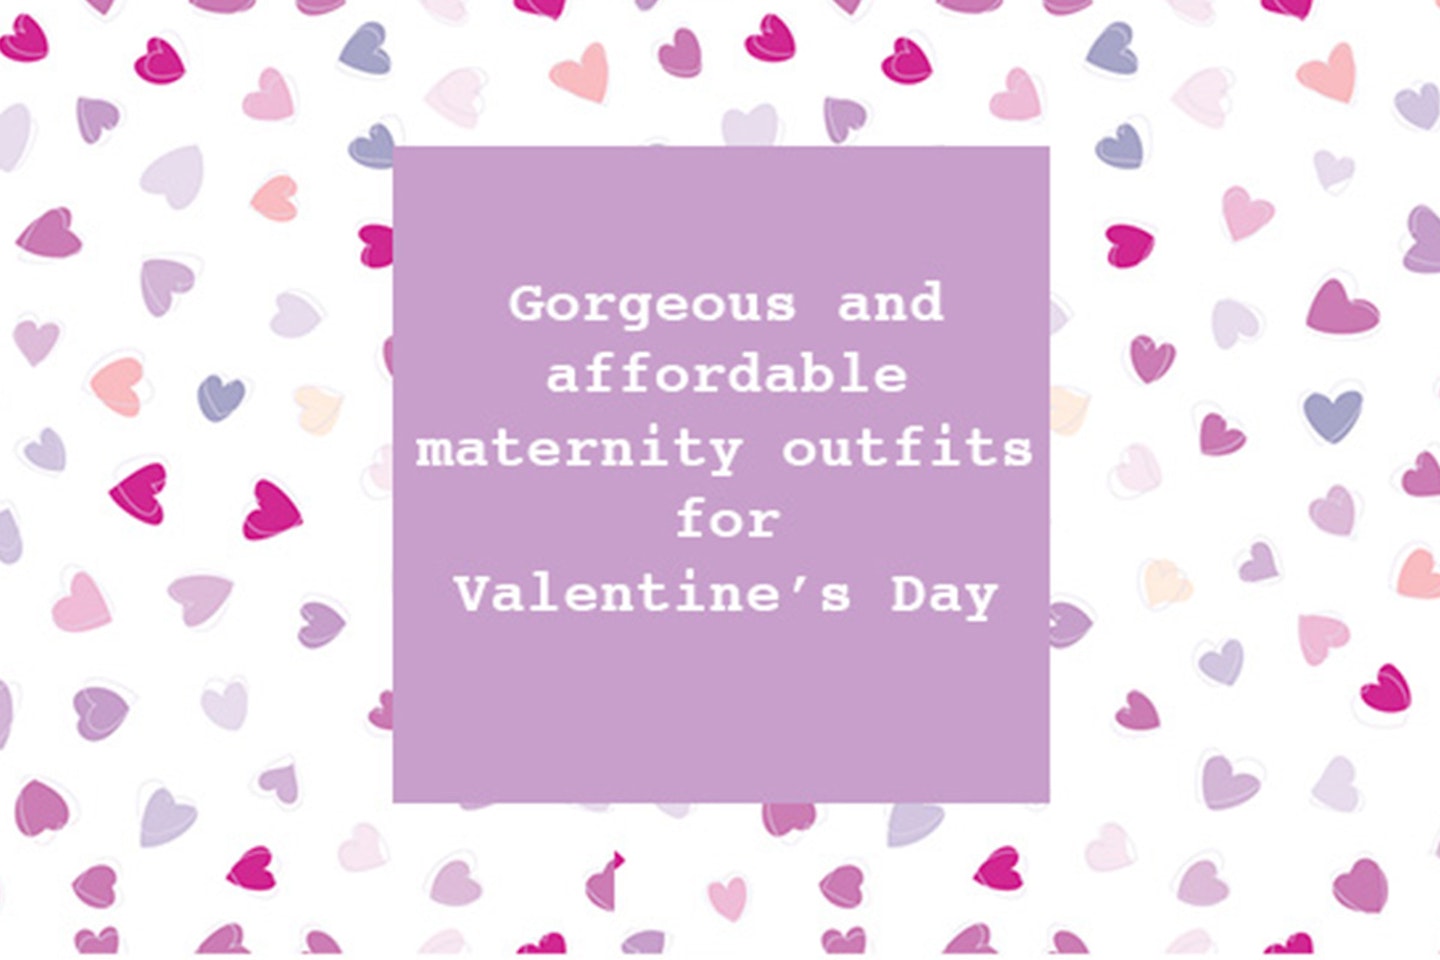 Maternity outfits for Valentine’s Day